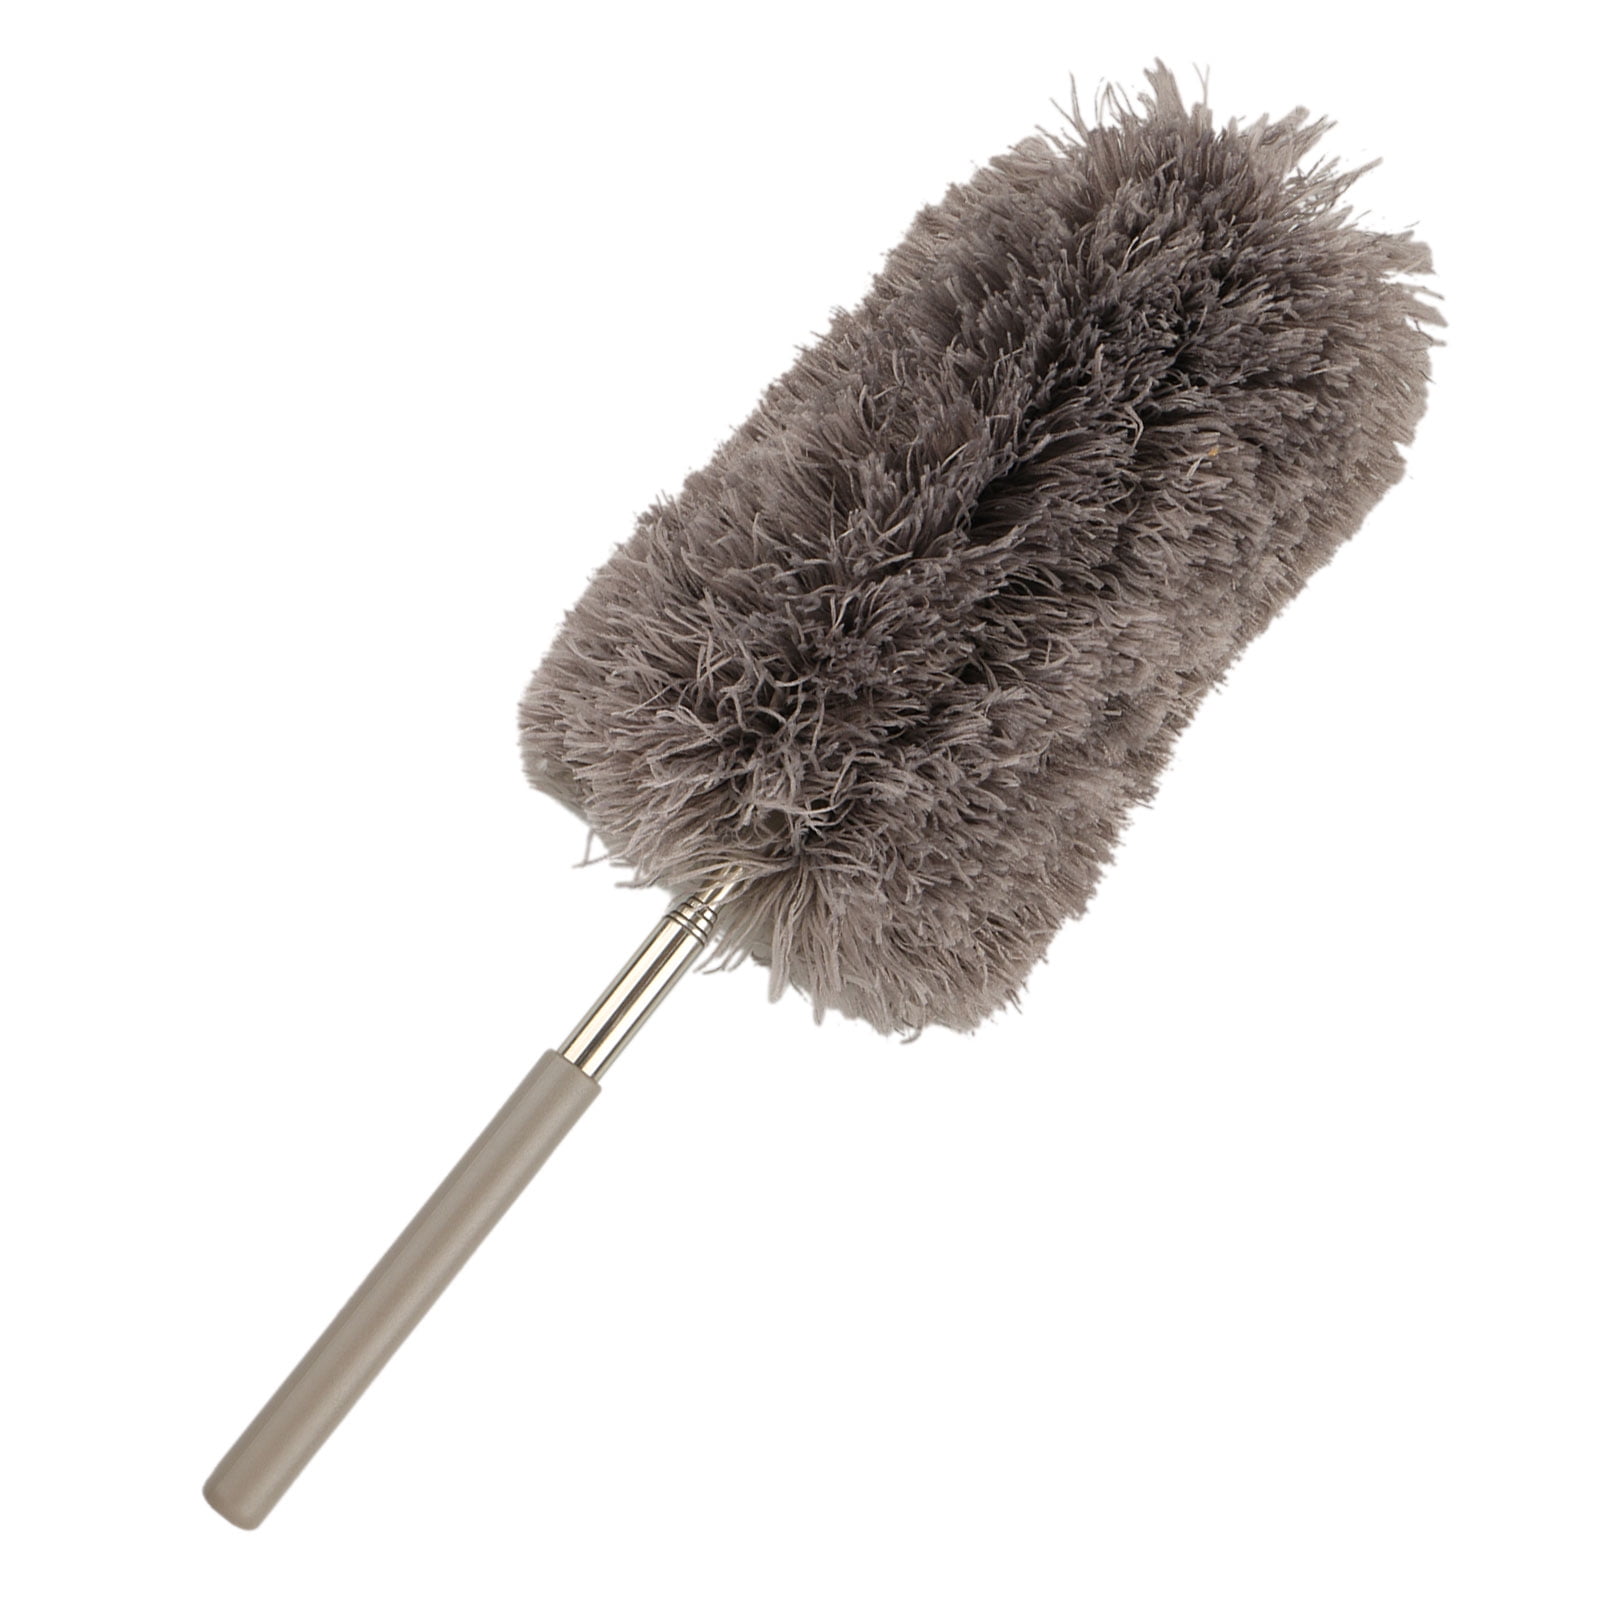 Telescopic Feather Duster Cleaning Equipment Wiper Dust Wiper Microfibre Household Household Supplies Cleaning Tipidkorpolri Cleaning Tools